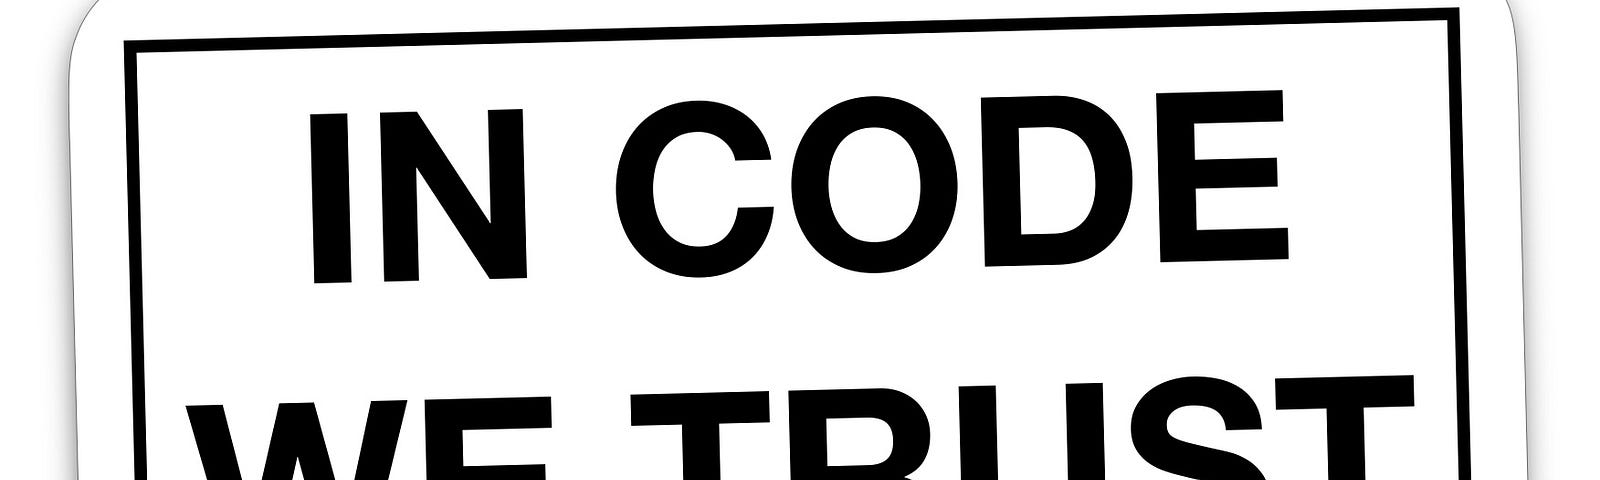 IMAGE: A white sticker with the words “In code we trust”